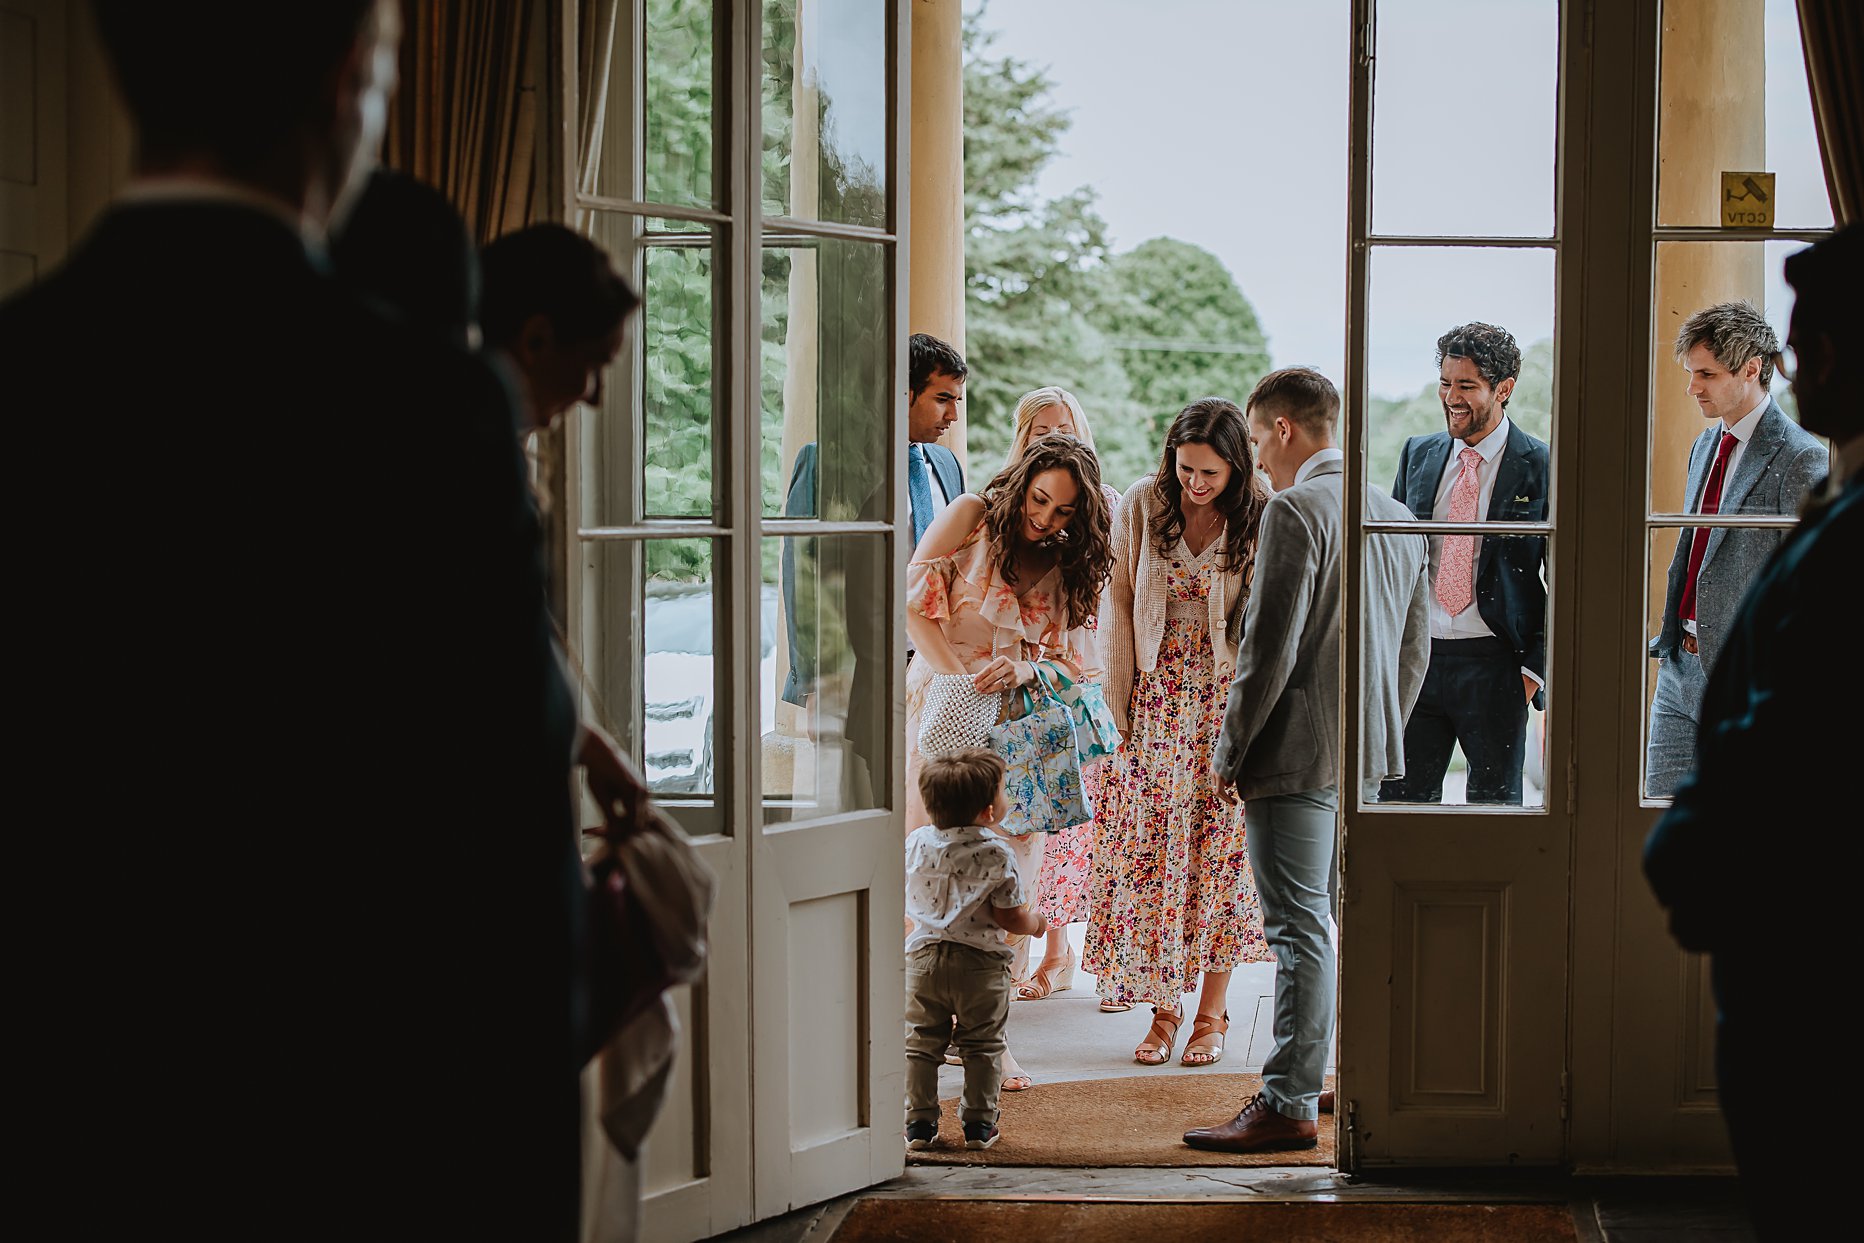 Guests arriving for a wedding at Saltmarshe Hall. The photo is taken from inside Saltmarshe hall and guests are framed by the door and windows.